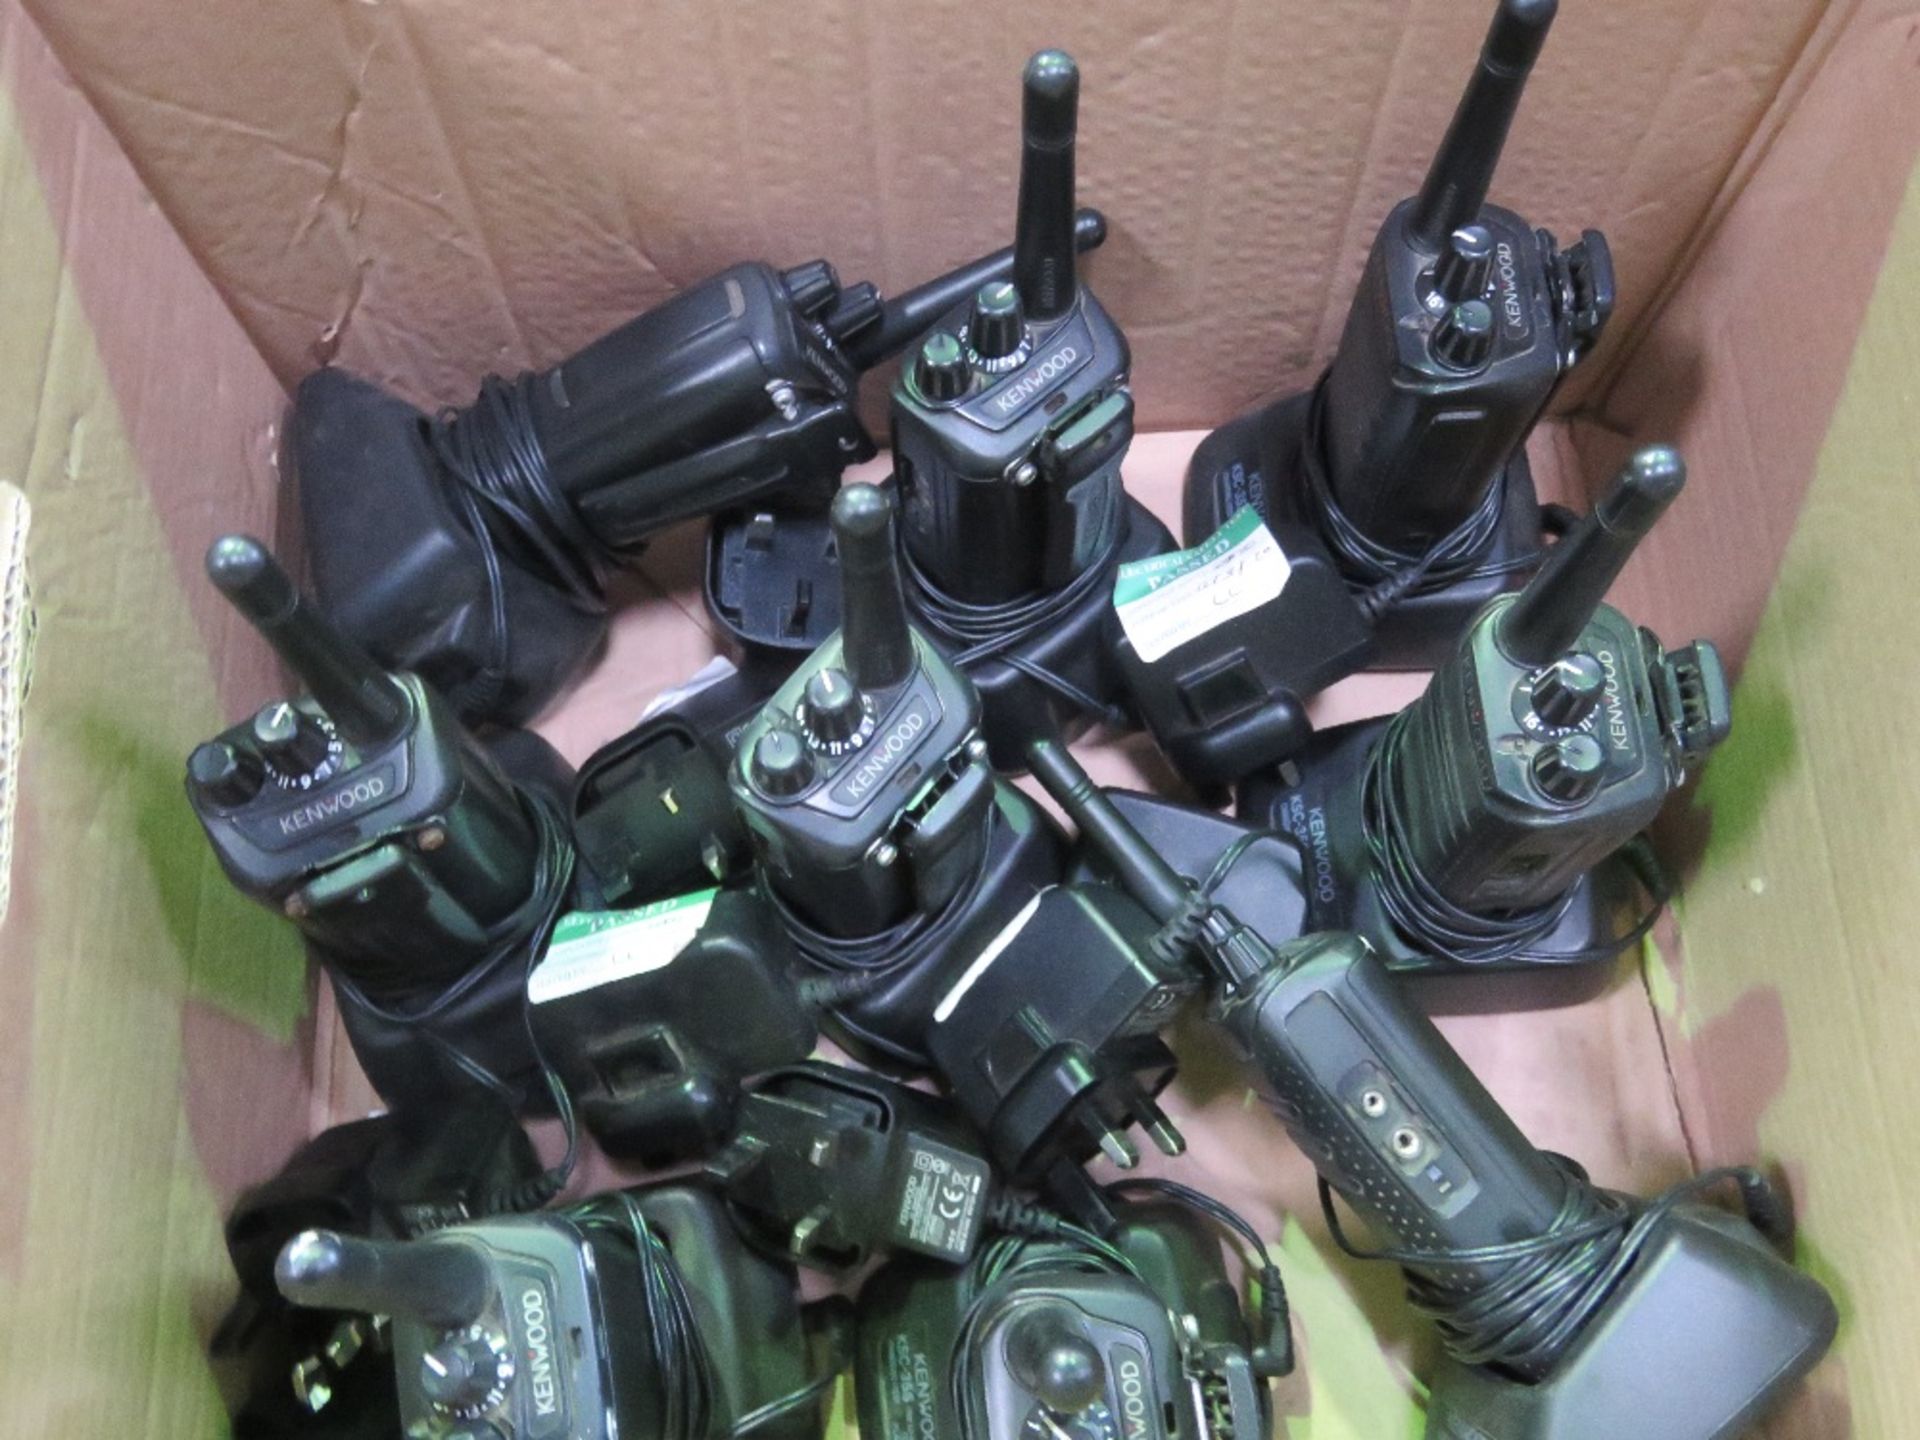 9NO KENWOOD WALKIE TALKIE RADIOS WITH CHARGERS. DIRECT FROM SITE CLOSURE. WORKING WHEN REMOVED. T